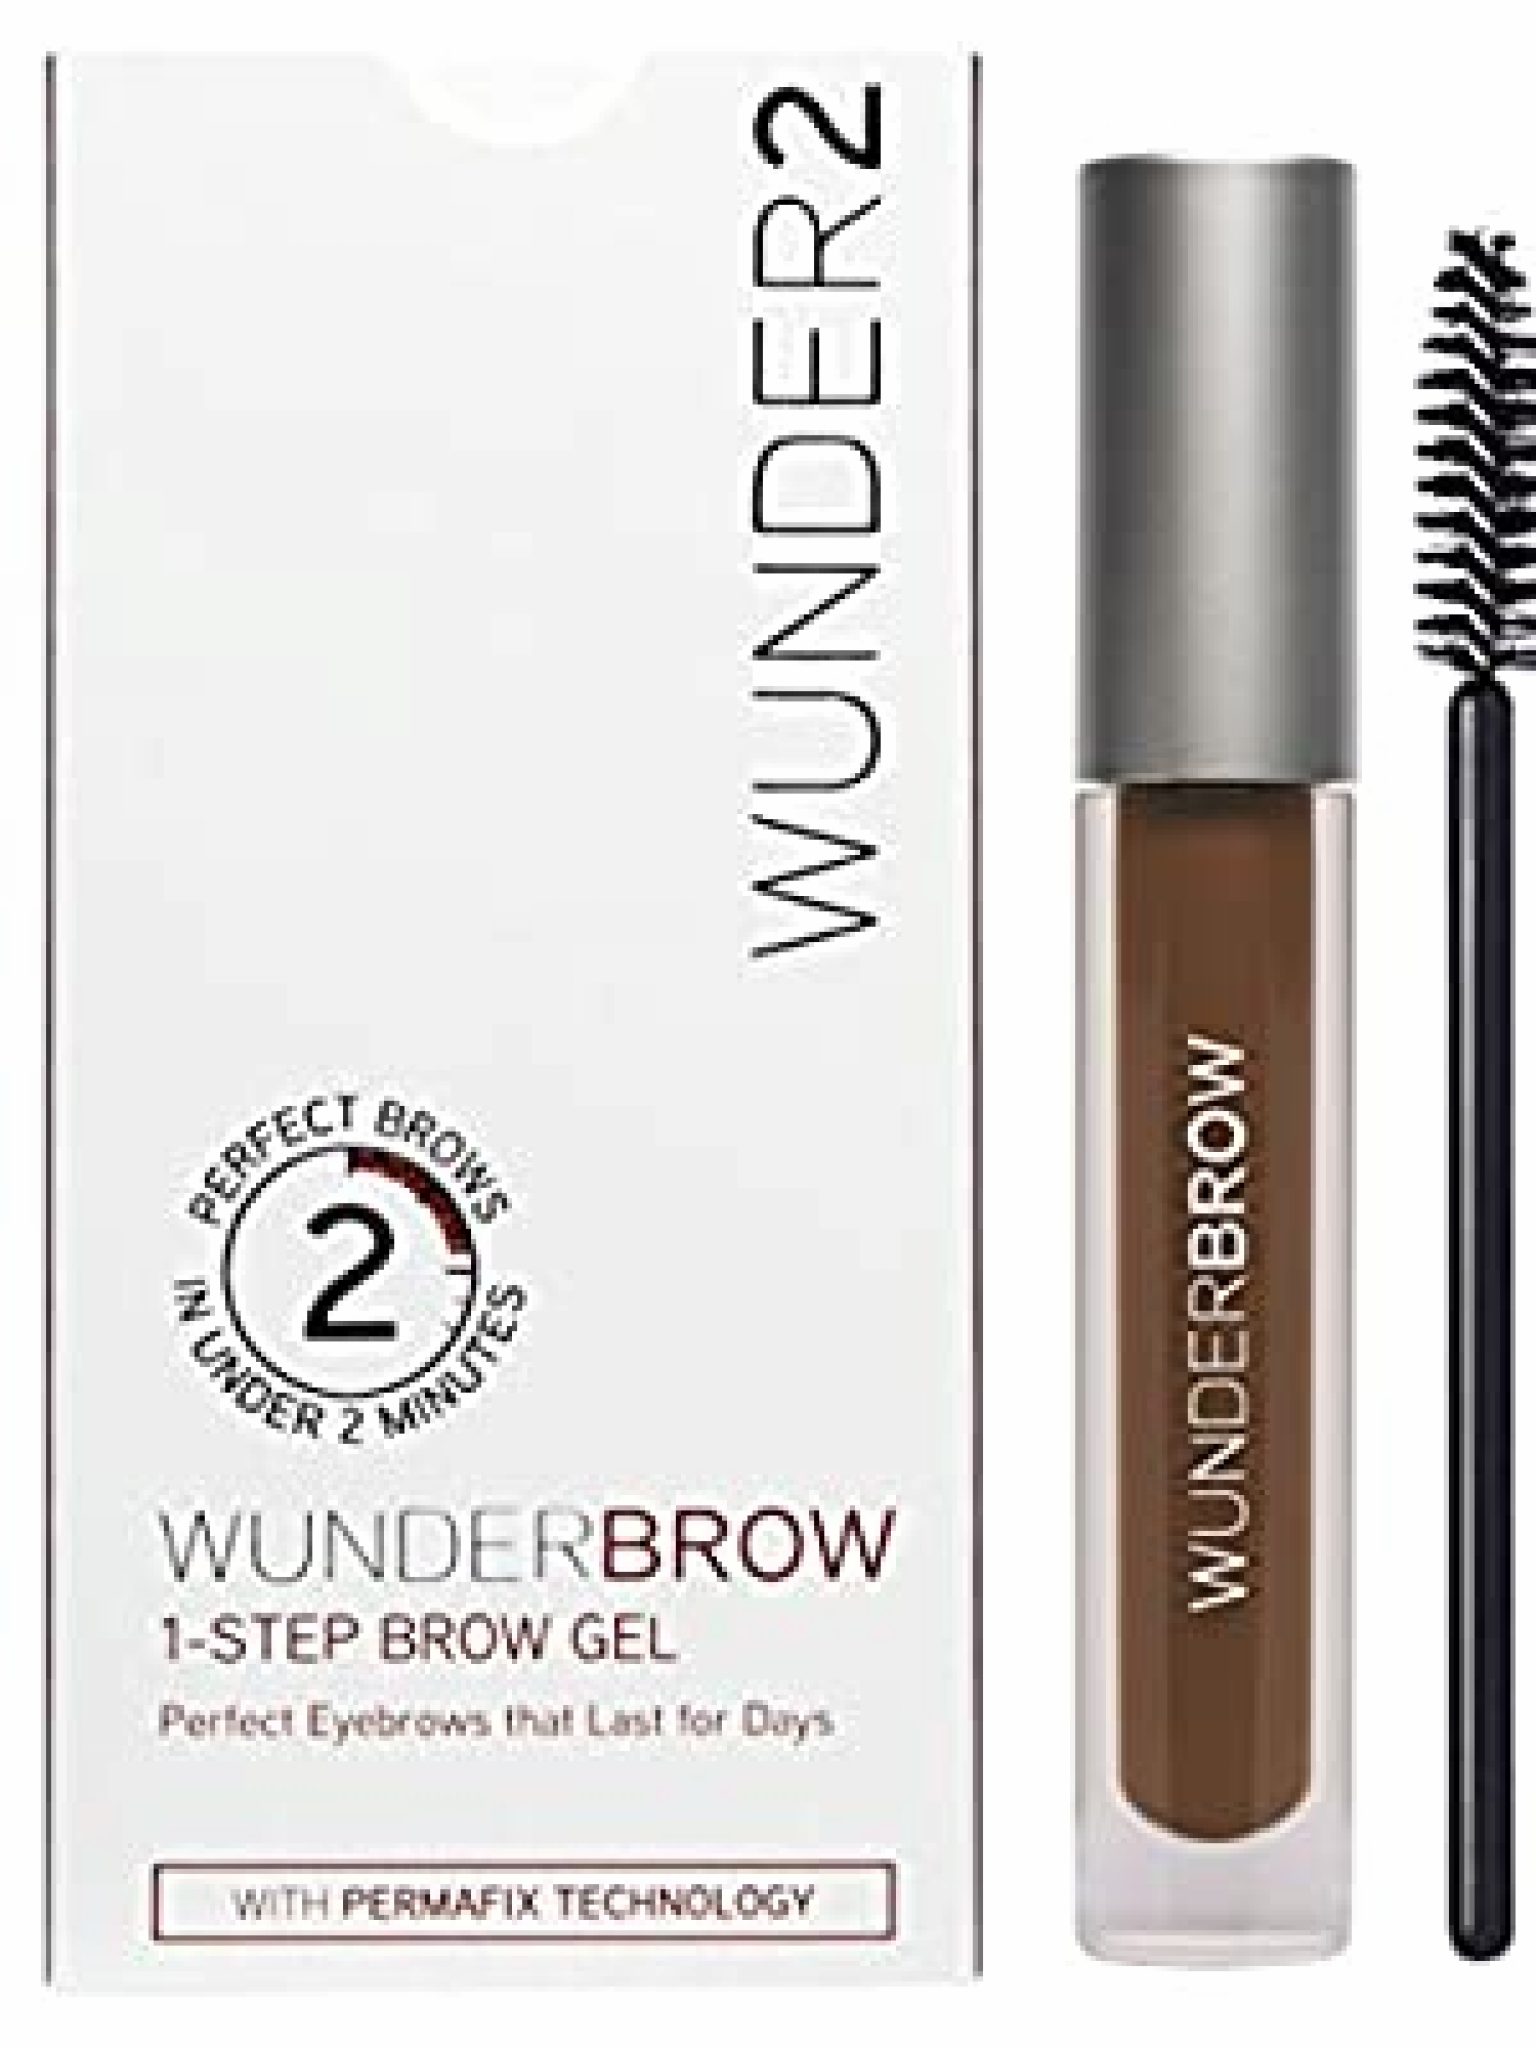 Wunderbrow - Wunder2 review